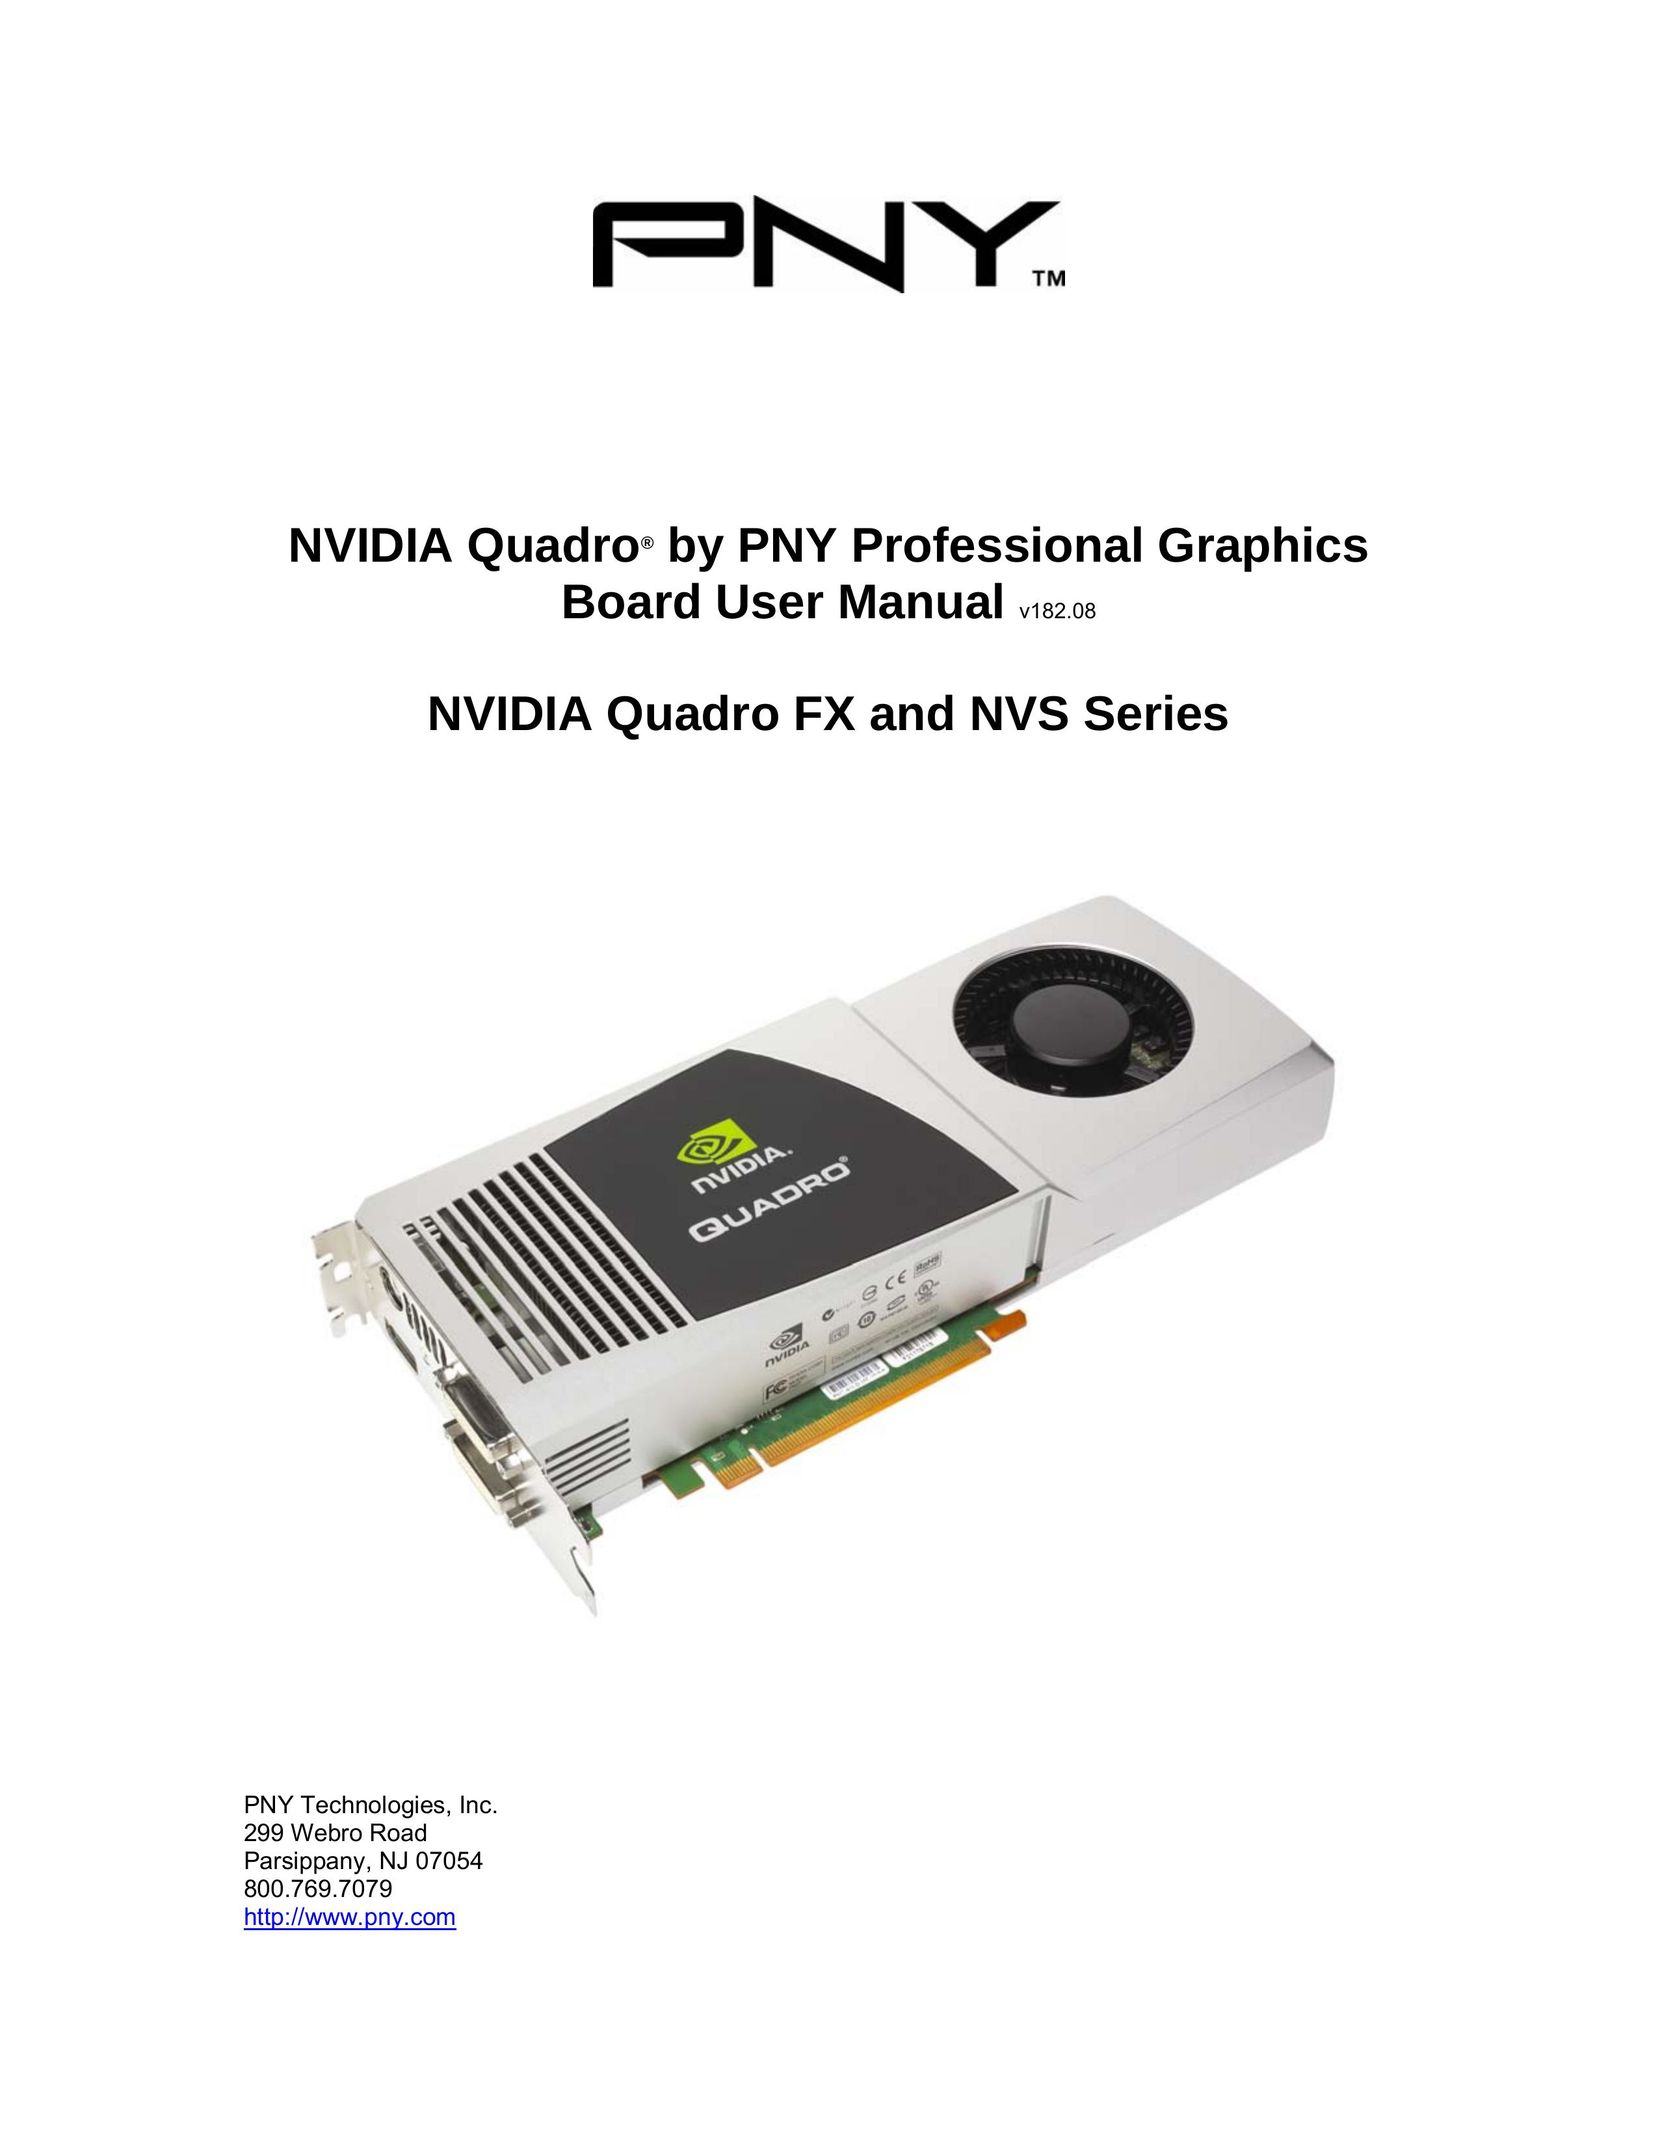 PNY FX 4700 X2 Computer Hardware User Manual